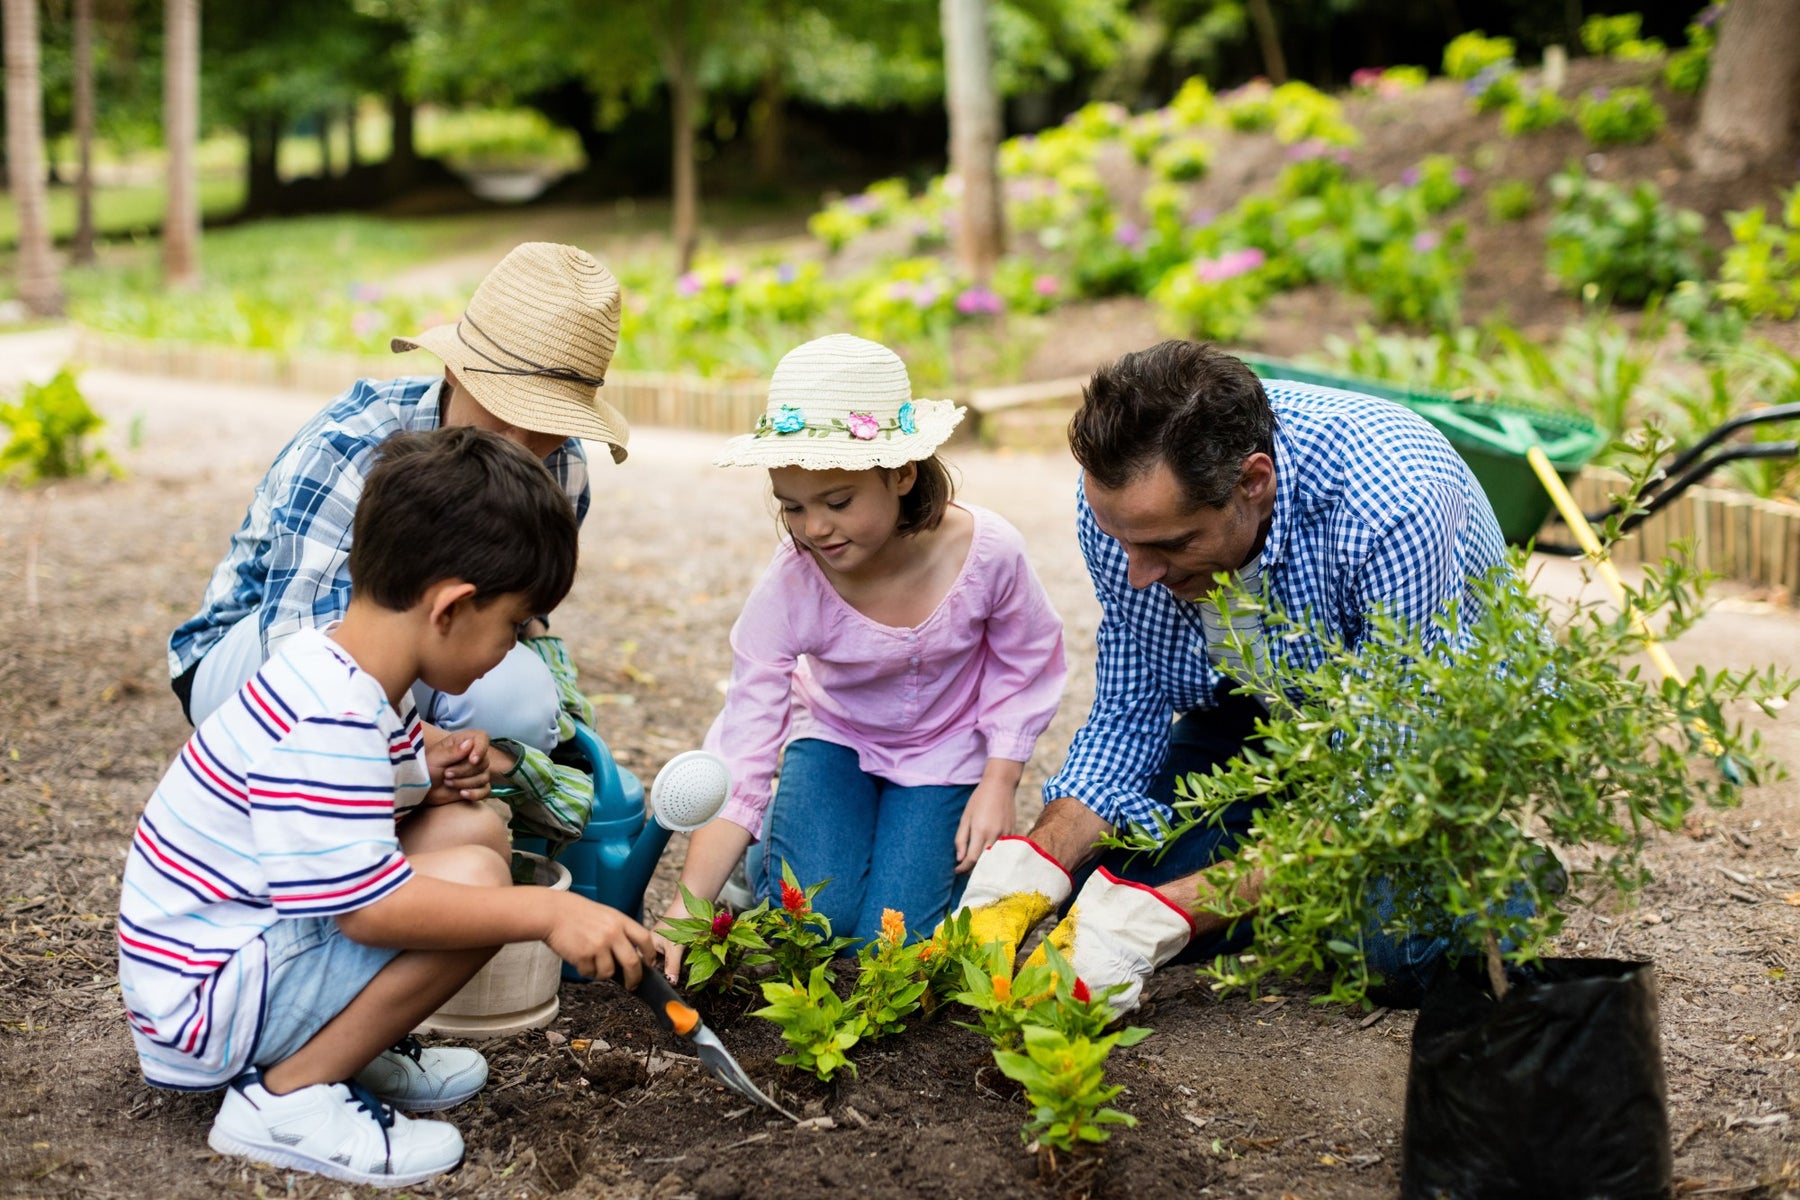 What Is the Importance of Gardening? Why Gardening Is Good For Your Health